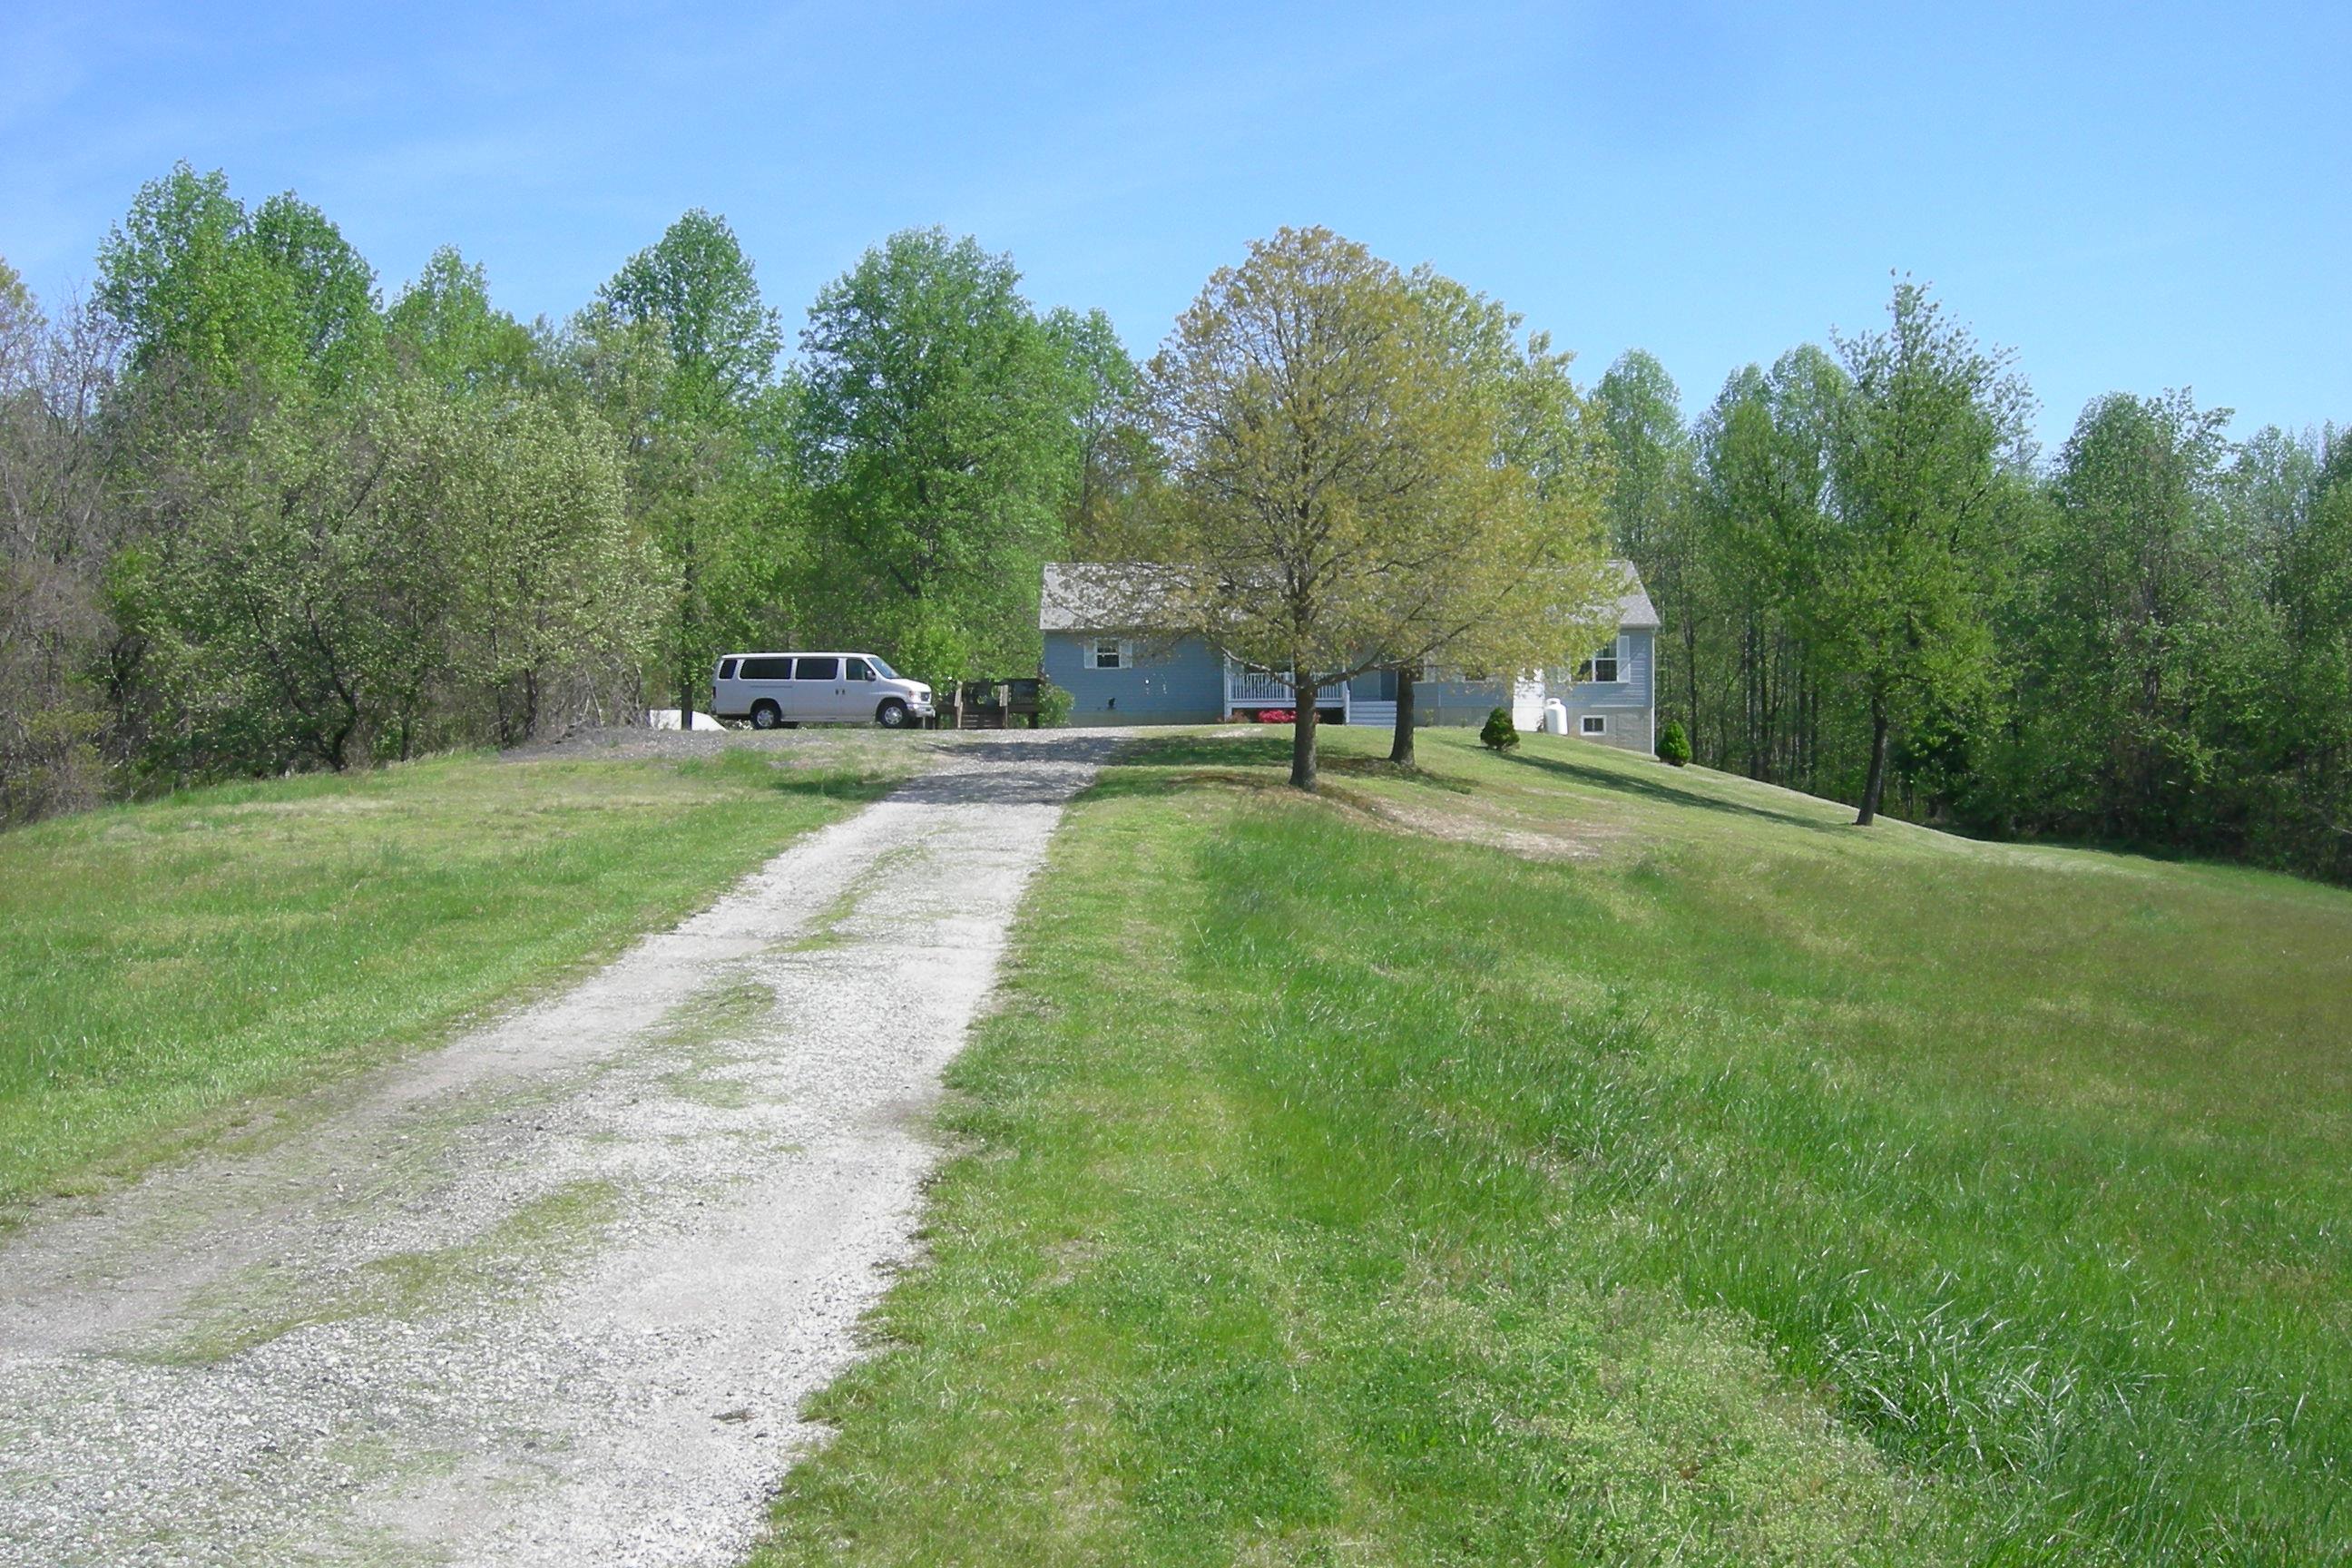 Aquasco Maryland in PG County Homes for Sale with Horse Property and Acreage